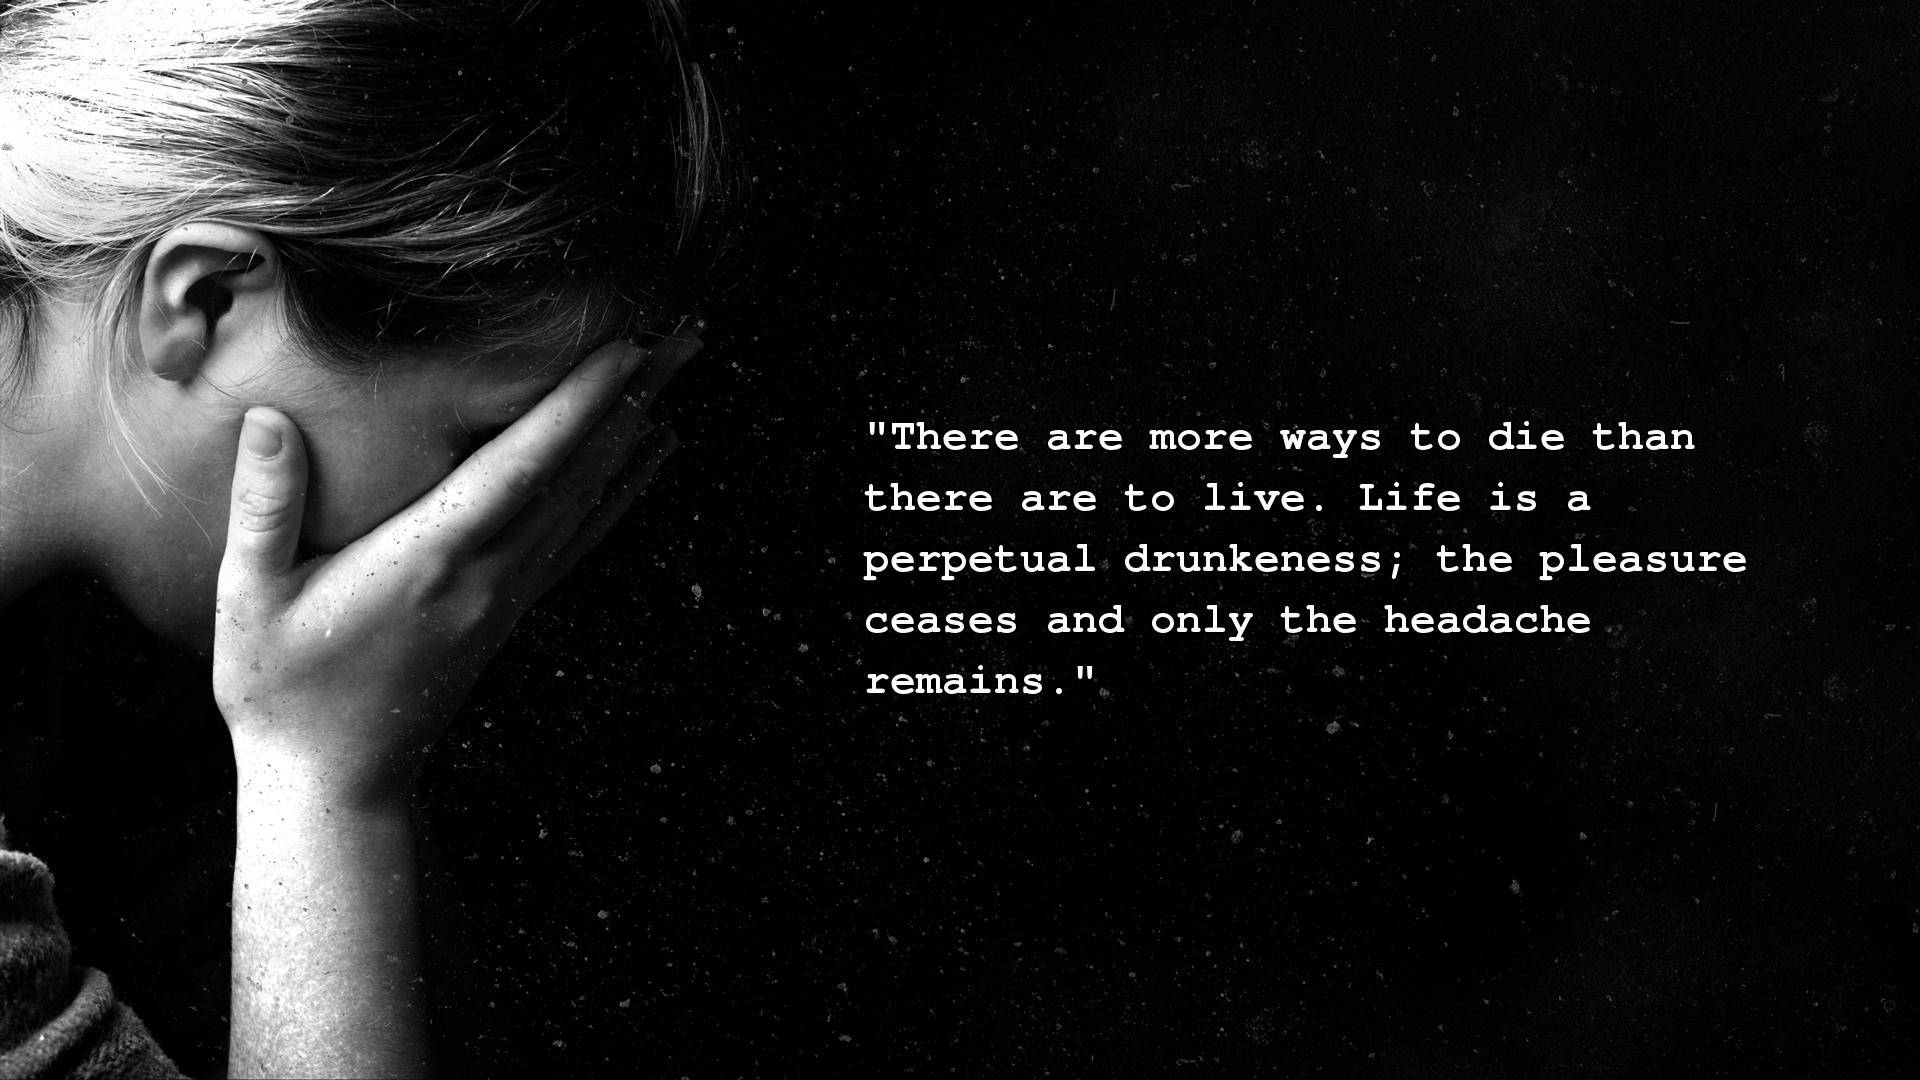 Crying Woman With Depressing Quote